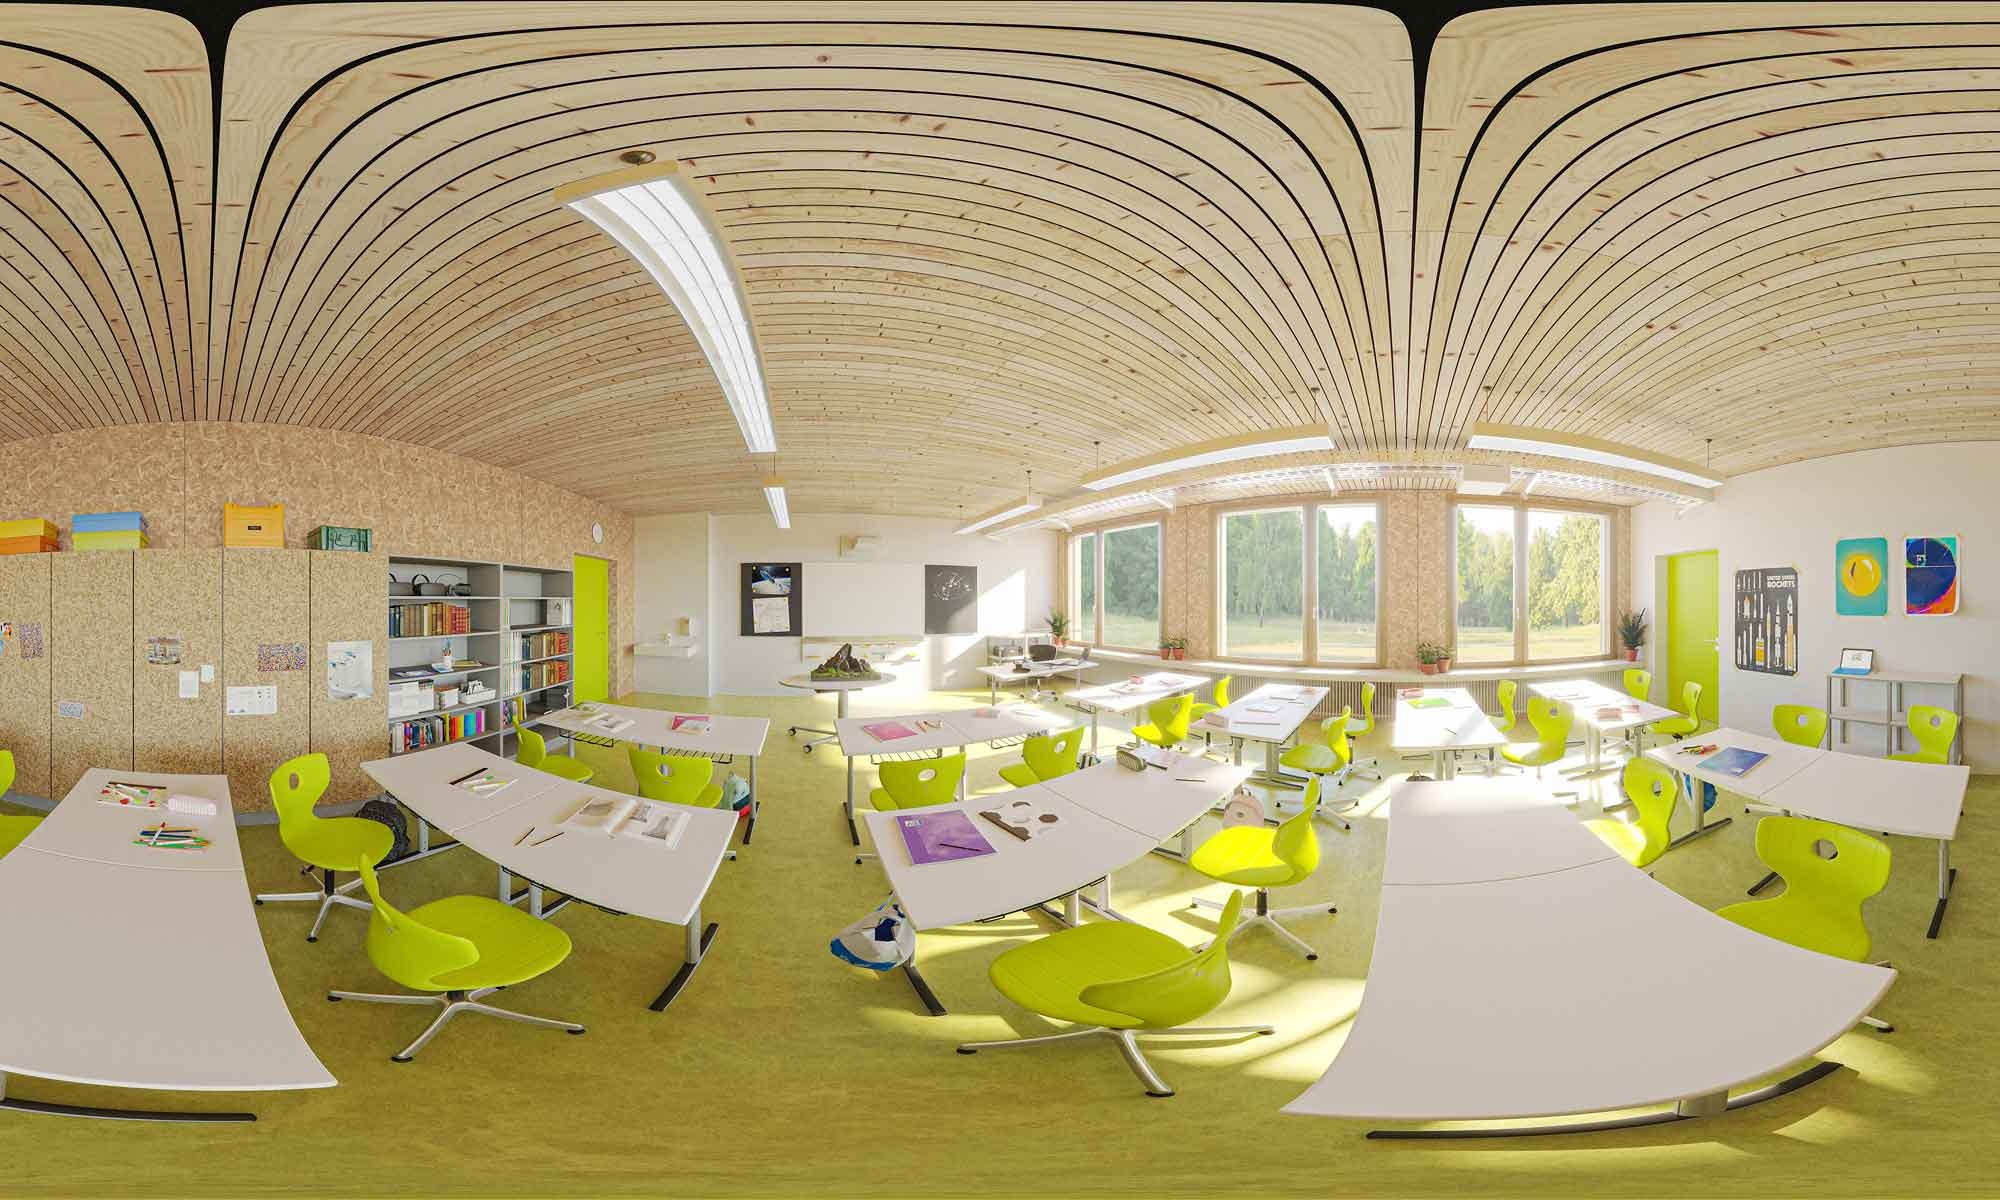 3D visualisation affords a virtual glimpse into a school made of timber